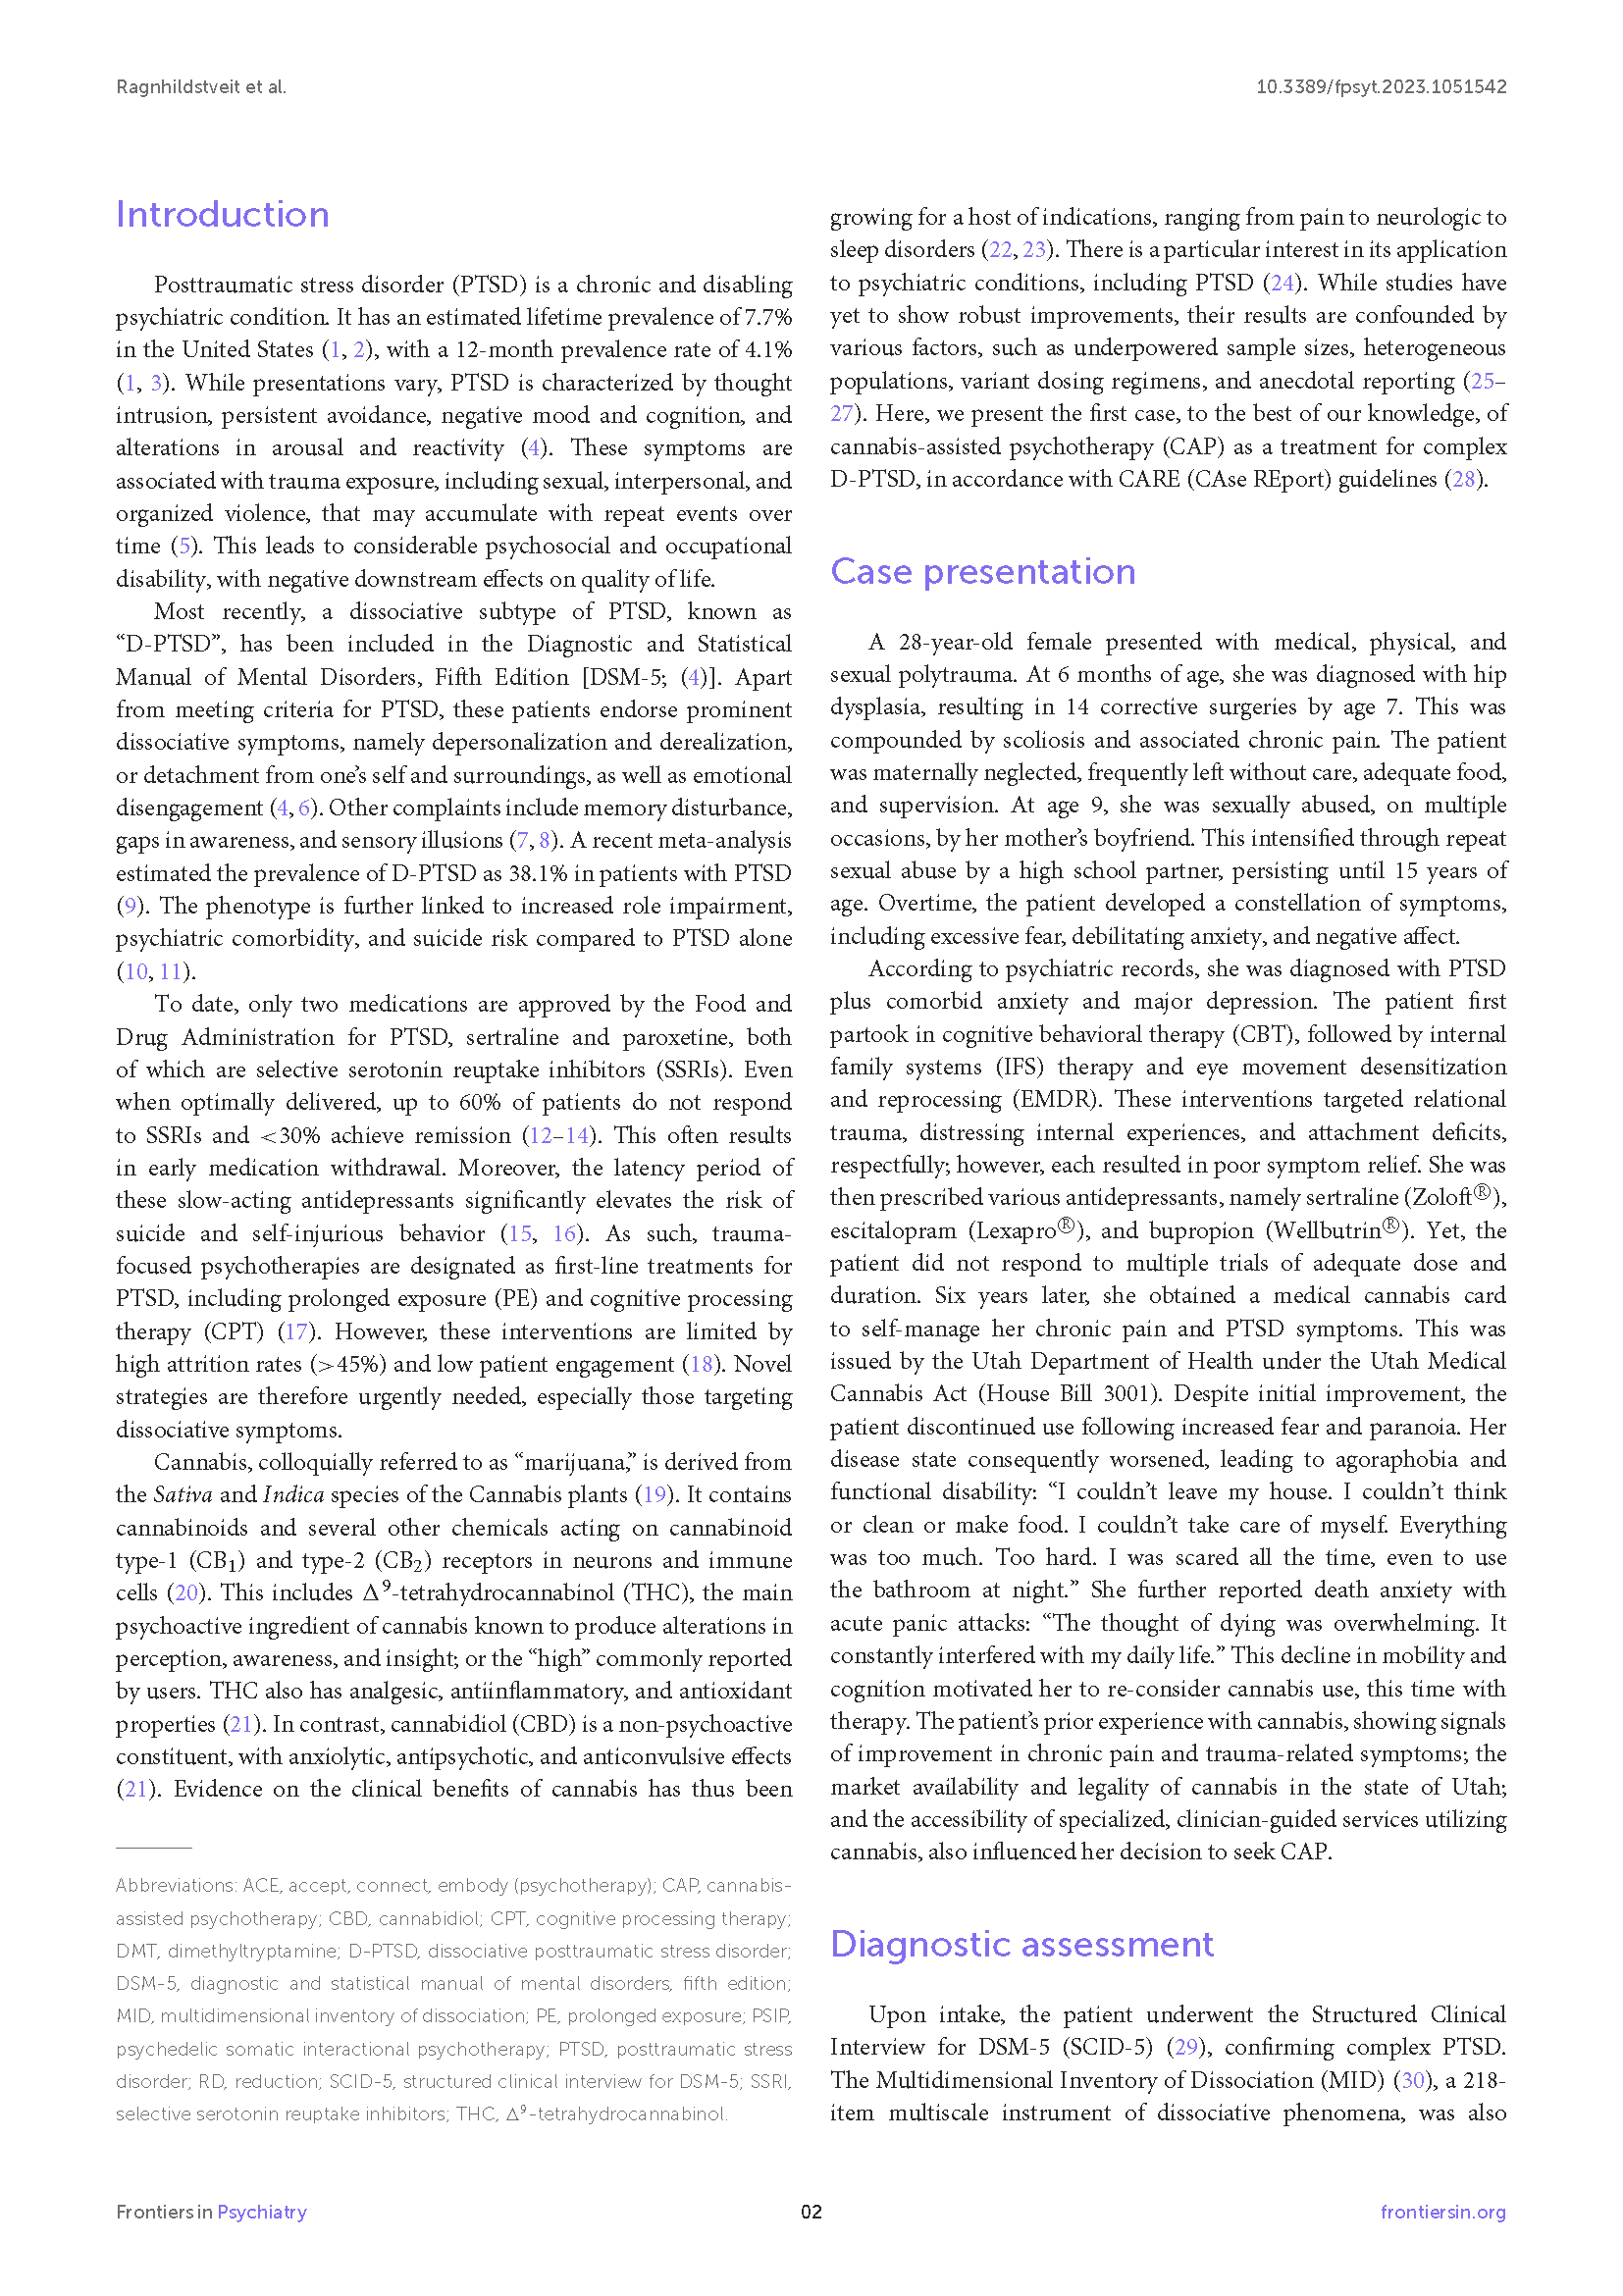 Cannabis-assisted psychotherapy for complex dissociative PTSD - A case report_Page_2.png